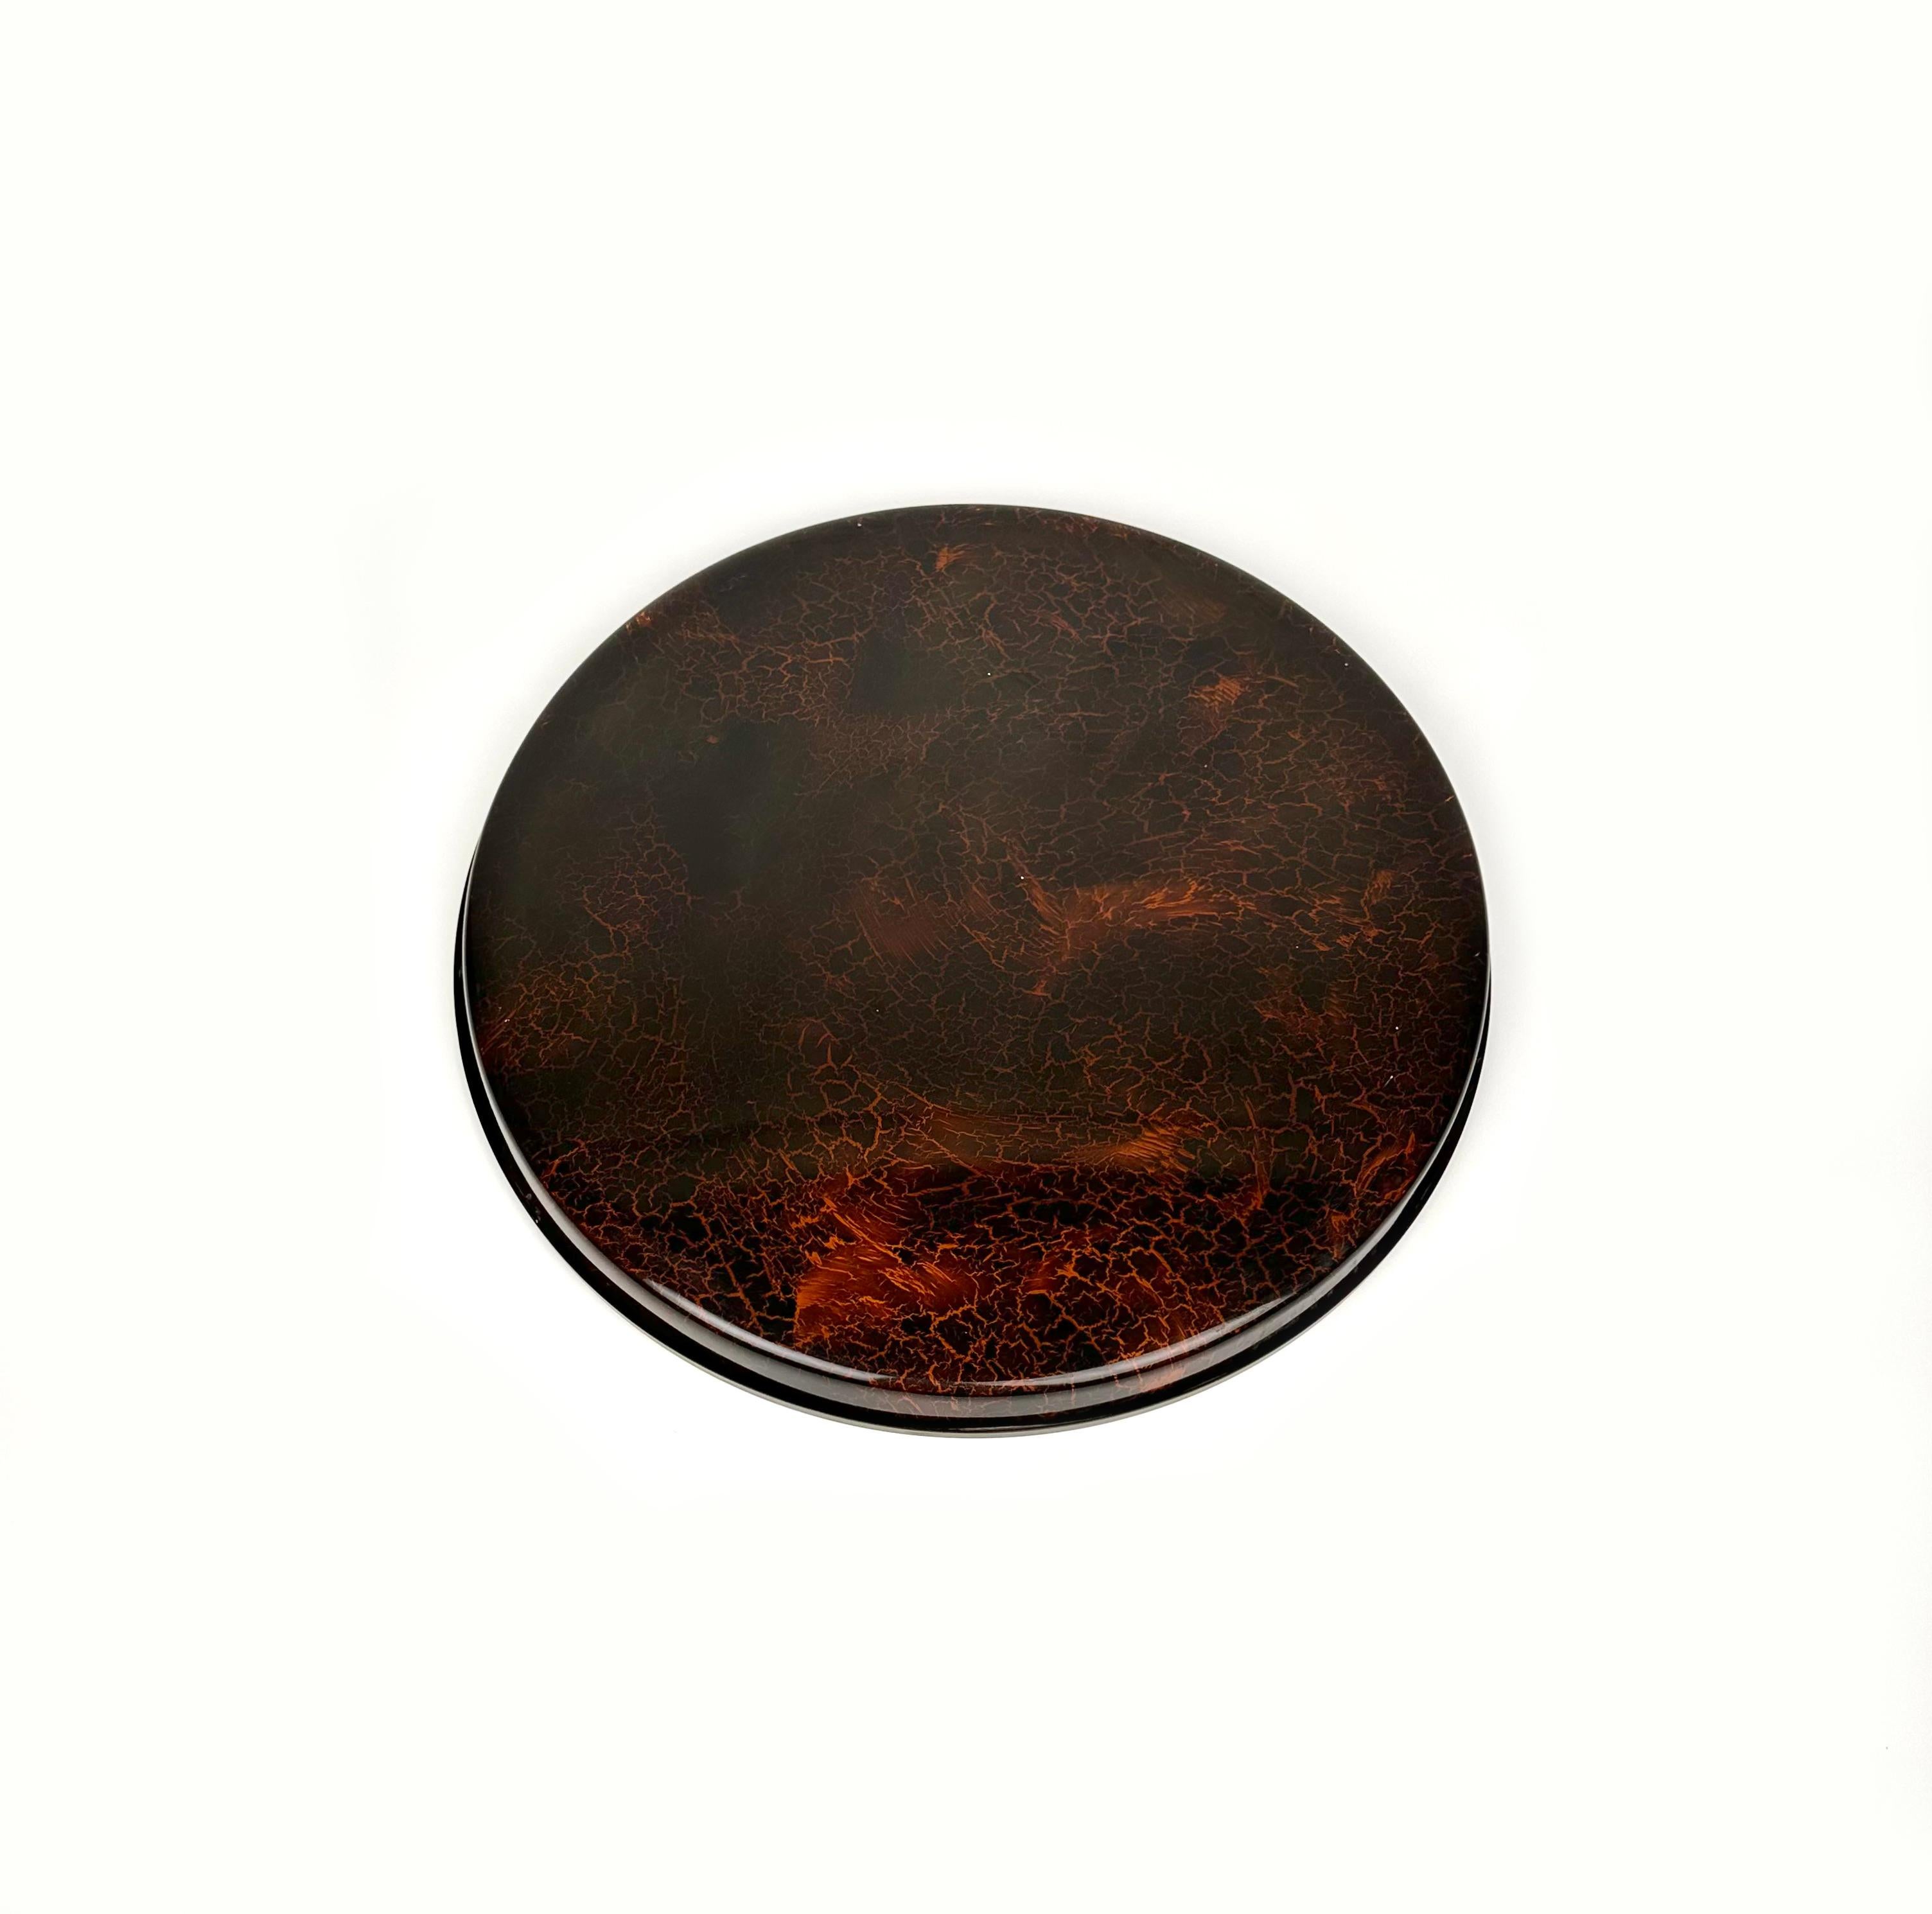 Round Centerpiece Serving Tray Lucite Faux Tortoiseshell and Brass, Italy 1970s For Sale 3